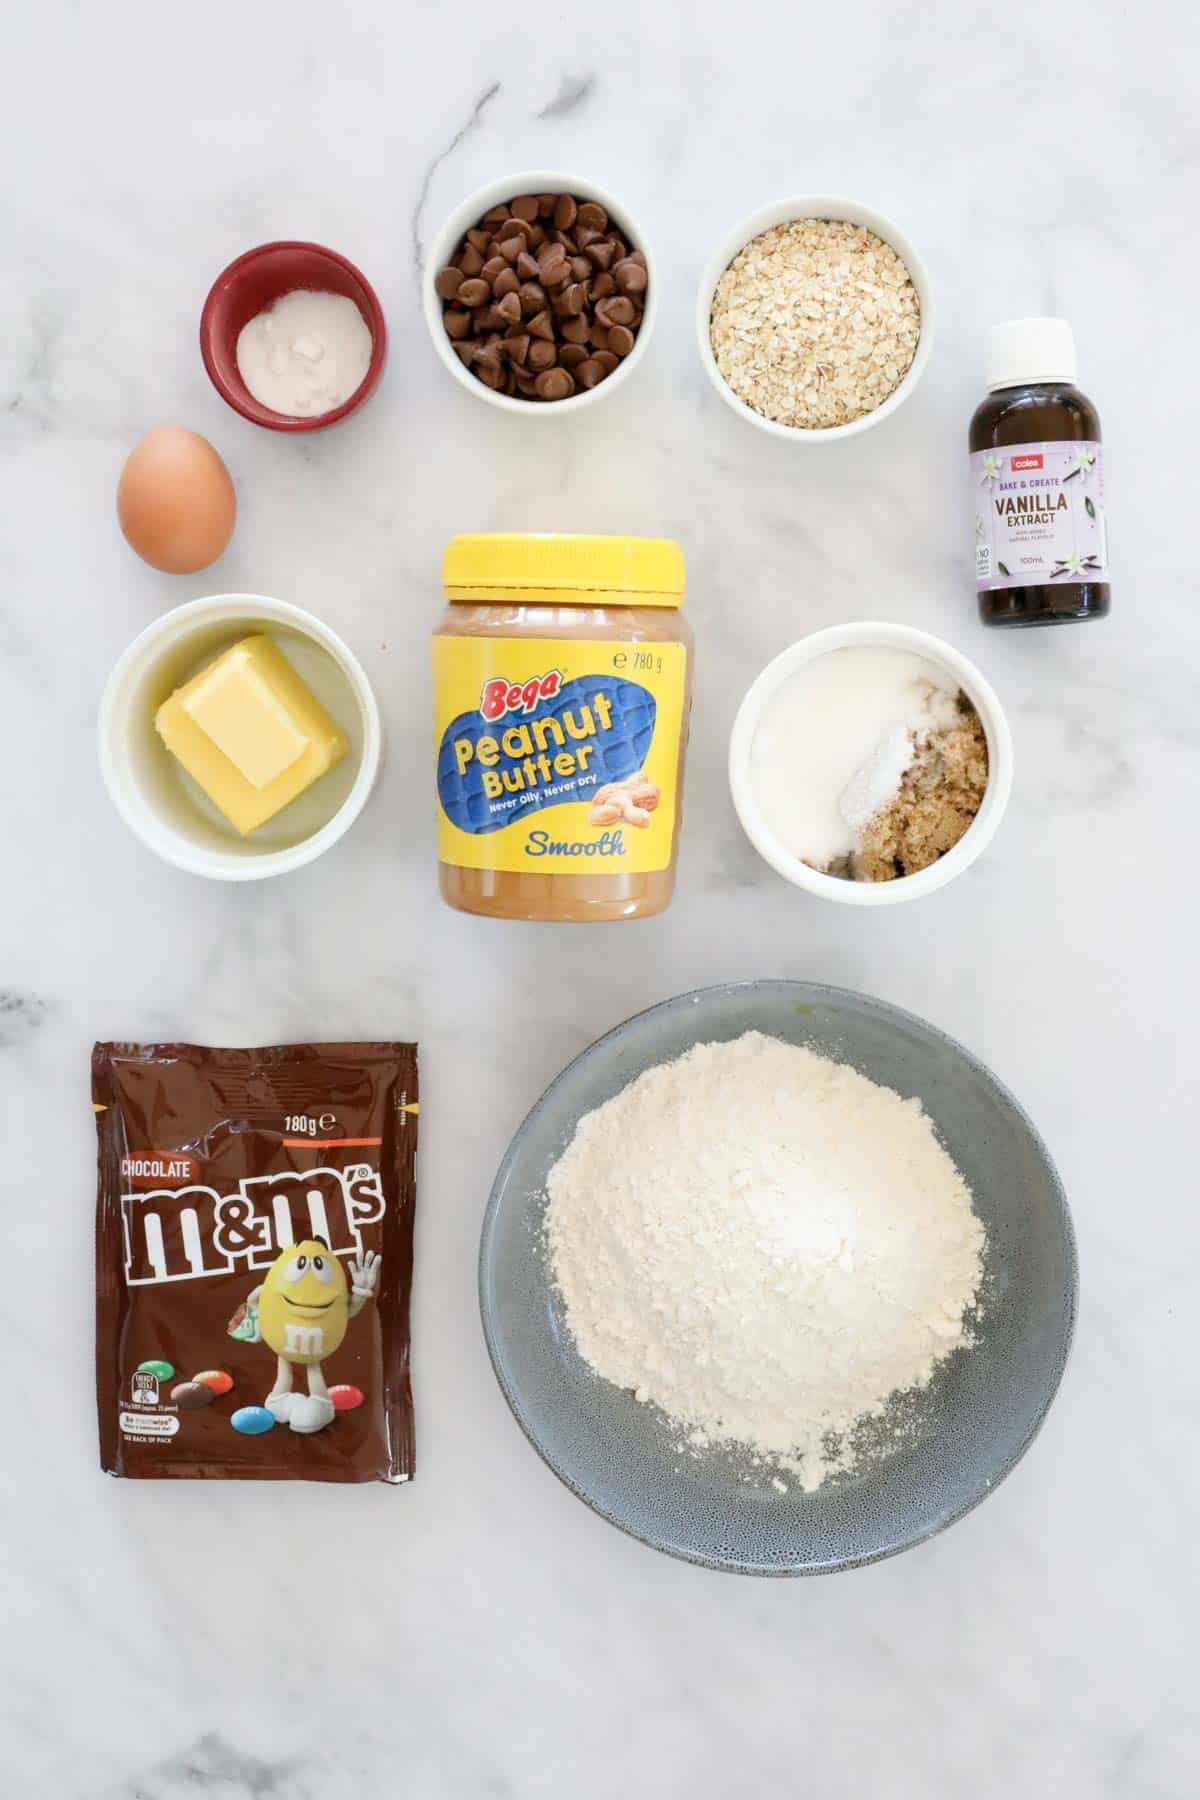 The ingredients for peanut butter, oat and M&M cookies.